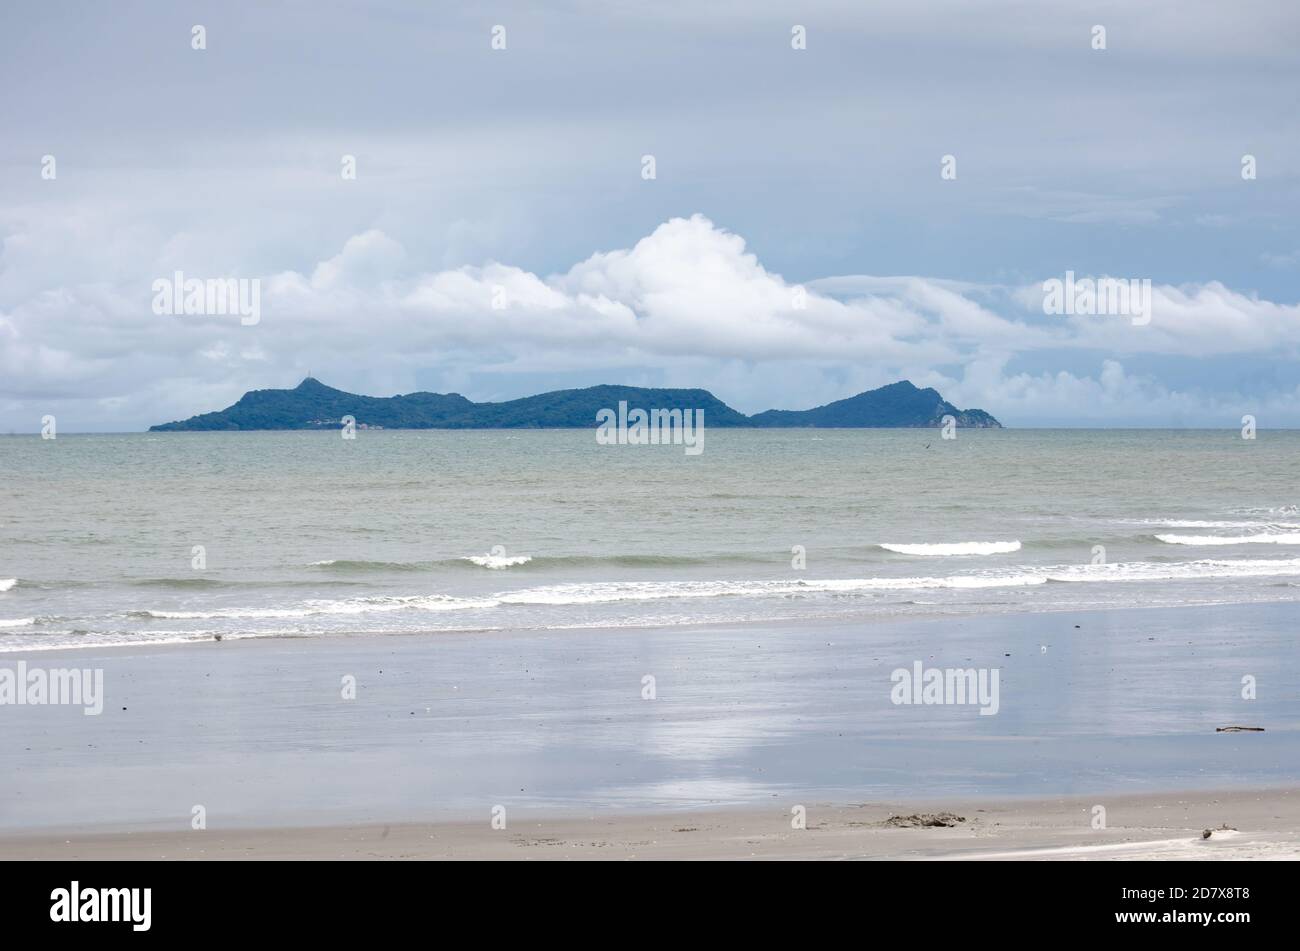 Punta Chame Beach located on a thin peninsula in the Gulf of Panama Stock Photo